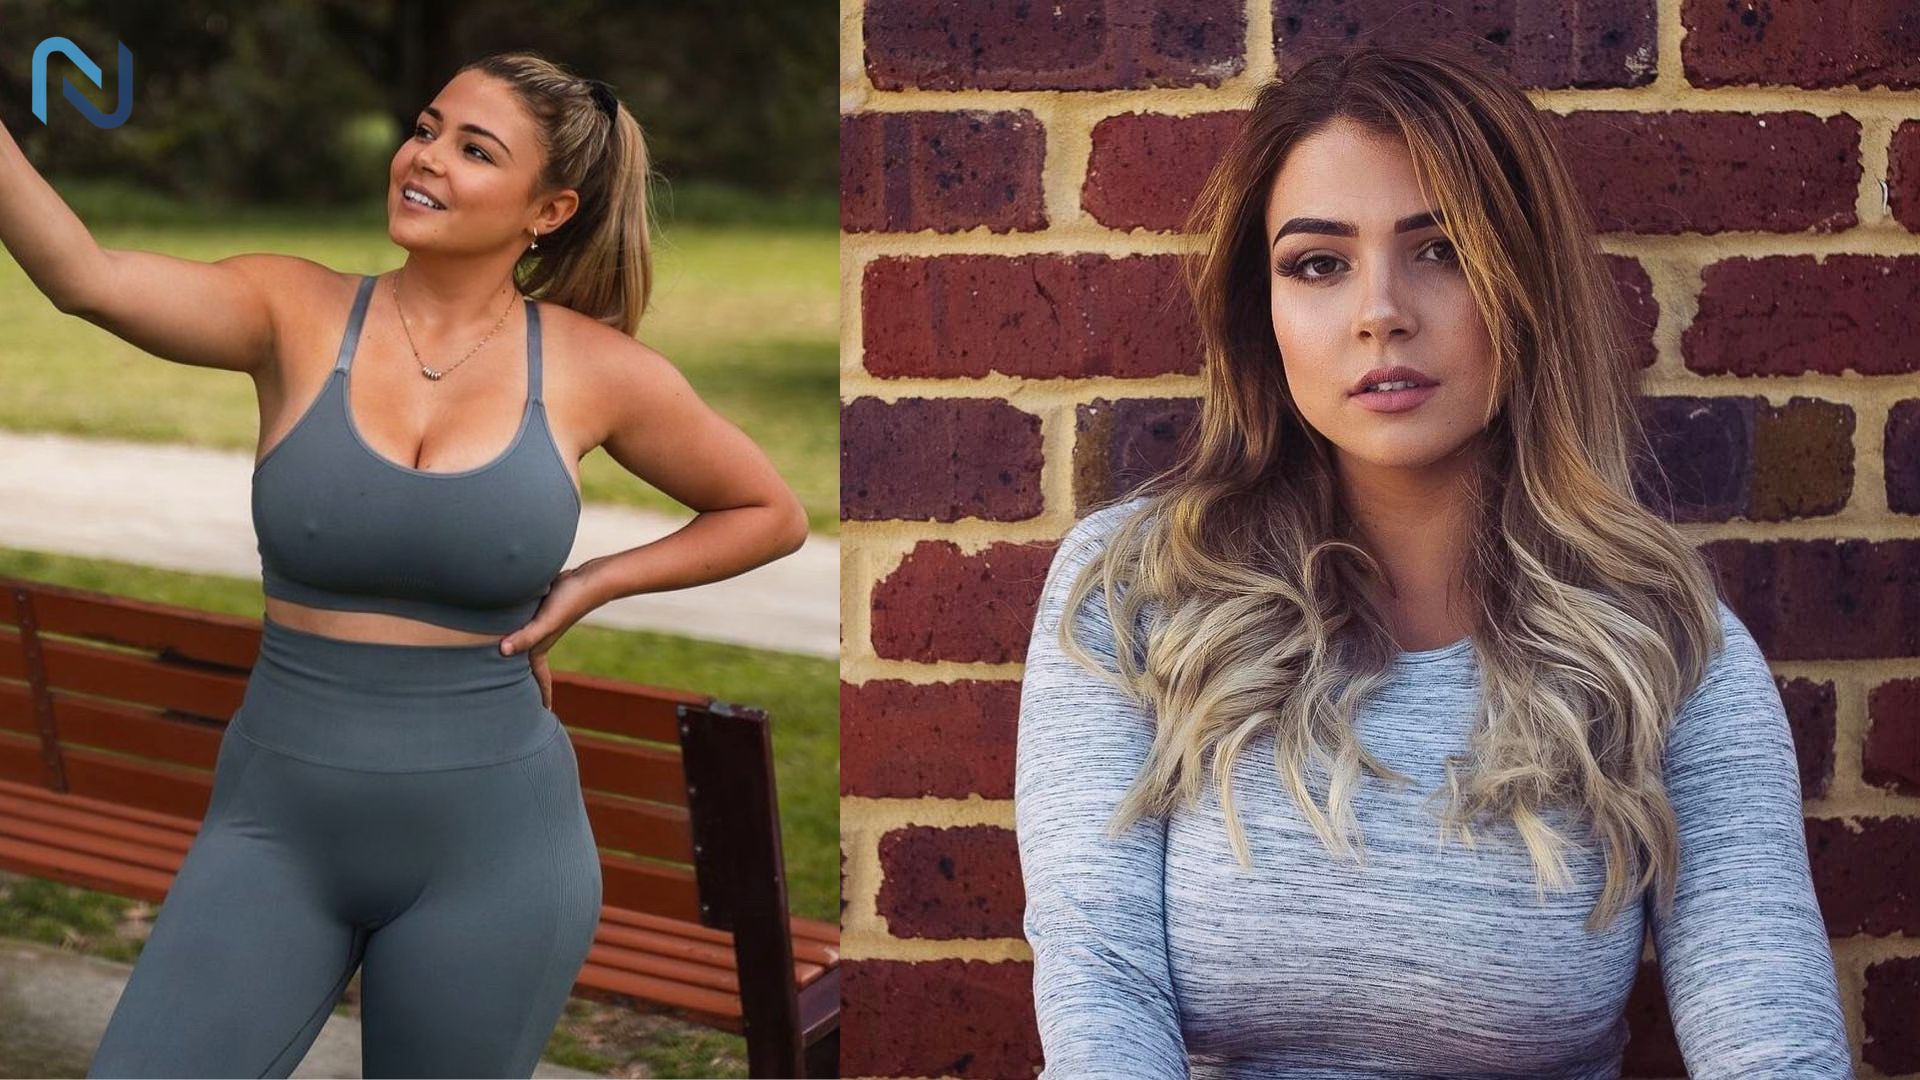 Fitness Trainer Jem Wolfie’s Bio Is Enough to Leave You in Awe